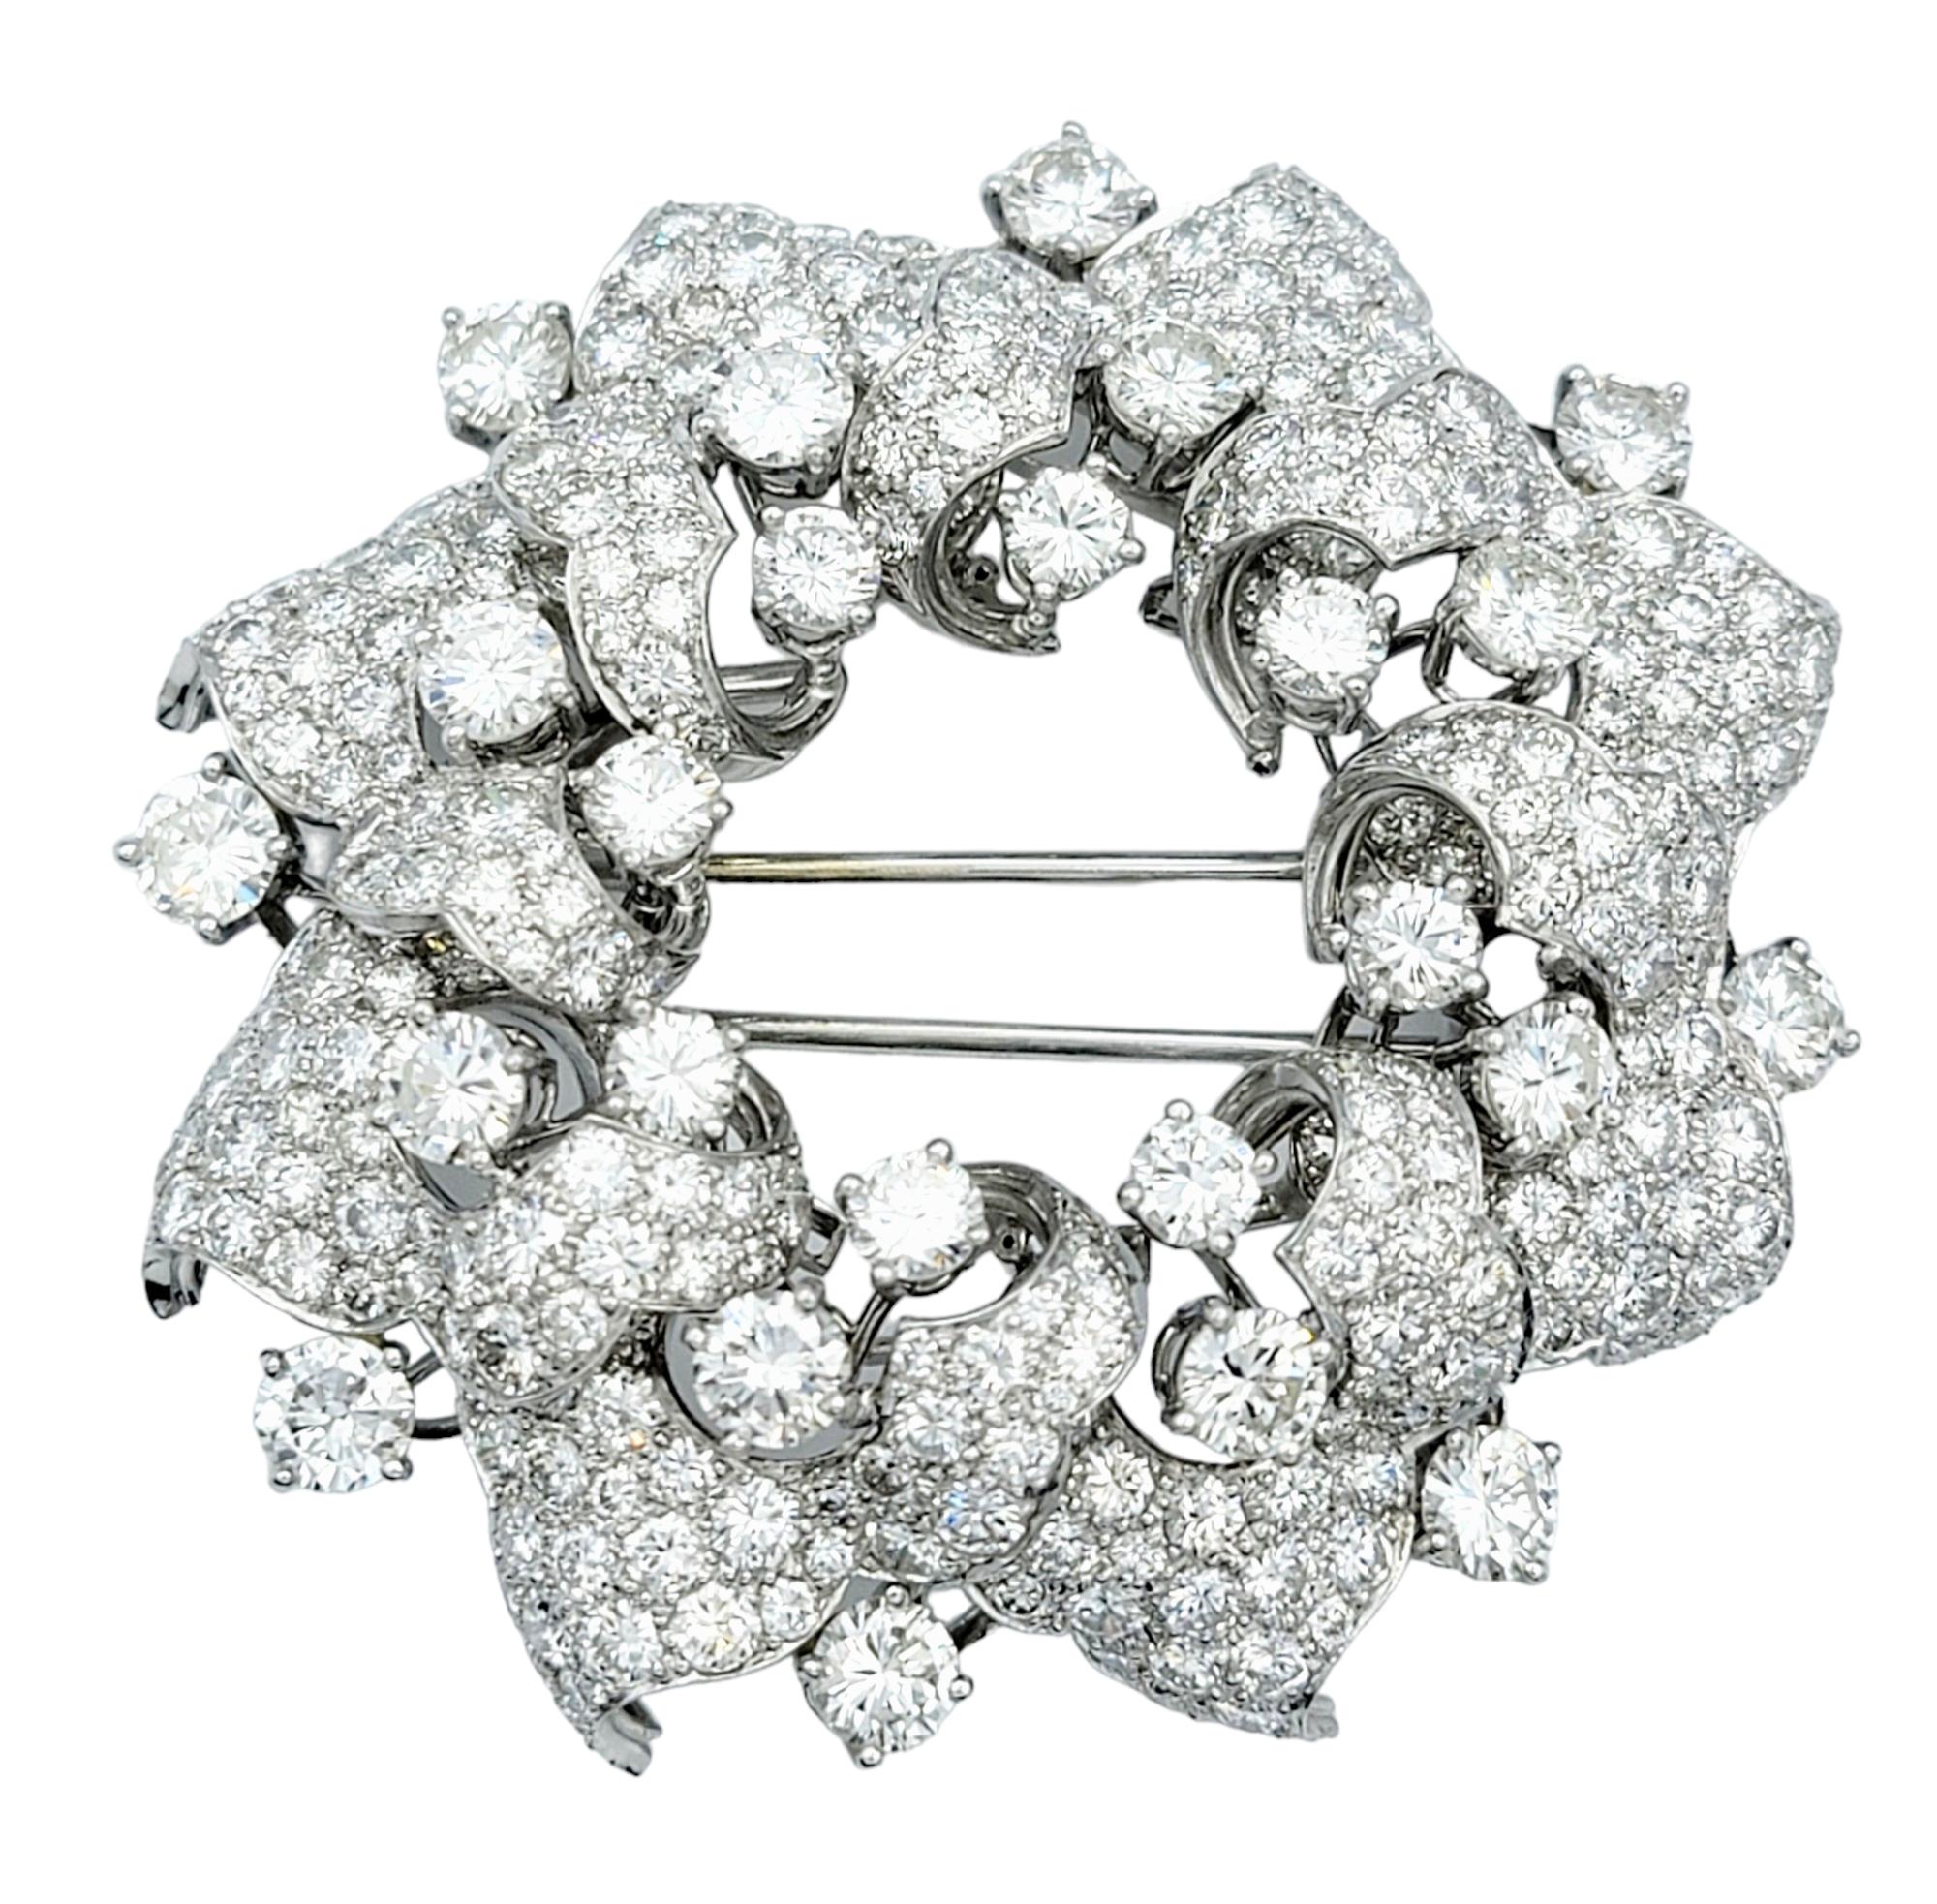 This stunning wreath brooch, set in luxurious platinum, is a breathtaking and opulent piece that exudes timeless elegance. The entire surface of the wreath is covered in various sizes of diamonds, creating a dazzling display of sparkle and